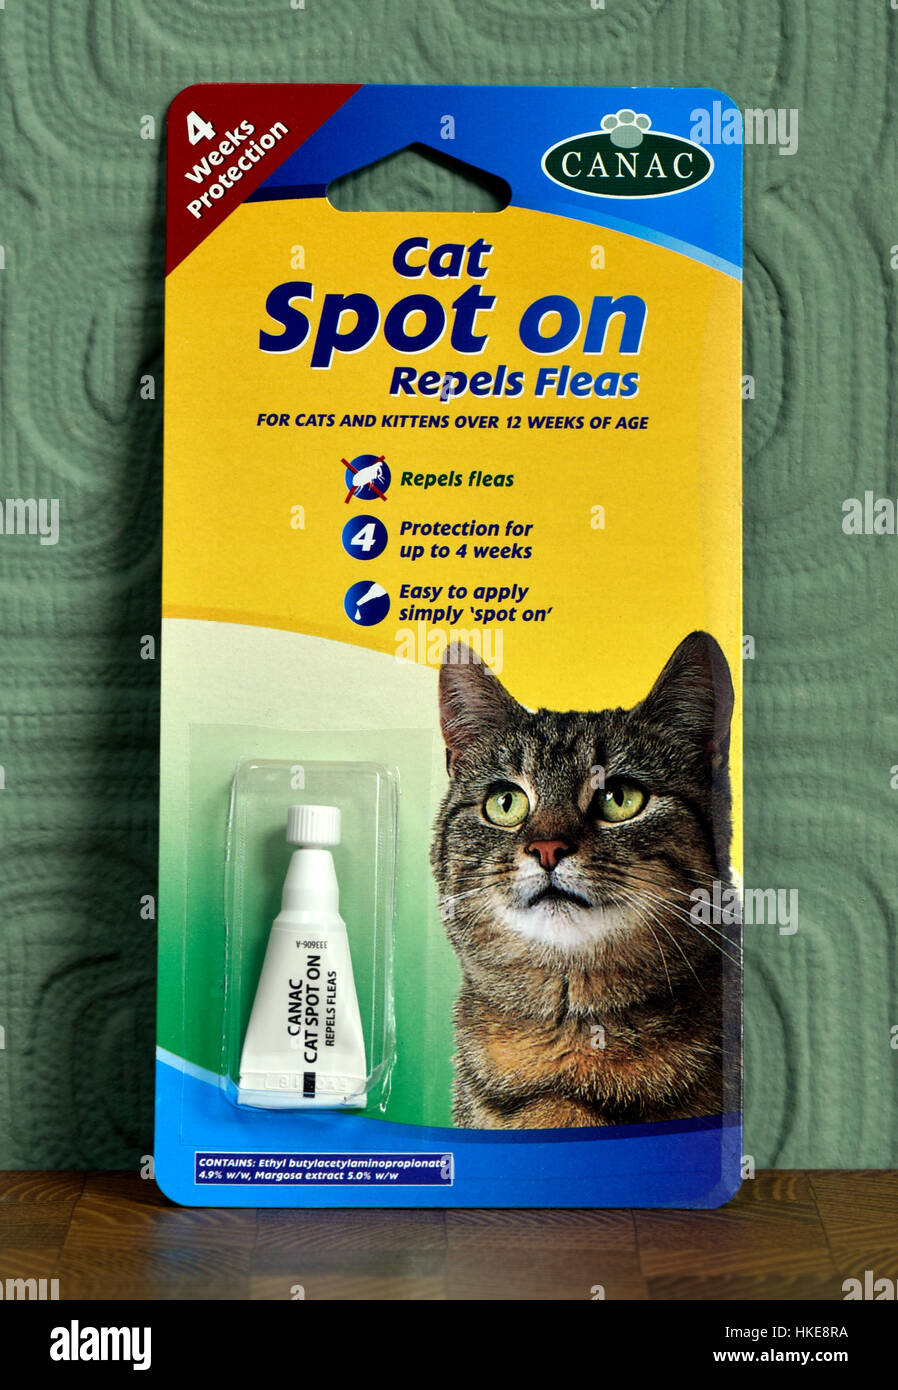 Canac  Cat Spot on repels fleas for cats and kittens over 12 weeks of age. Stock Photo